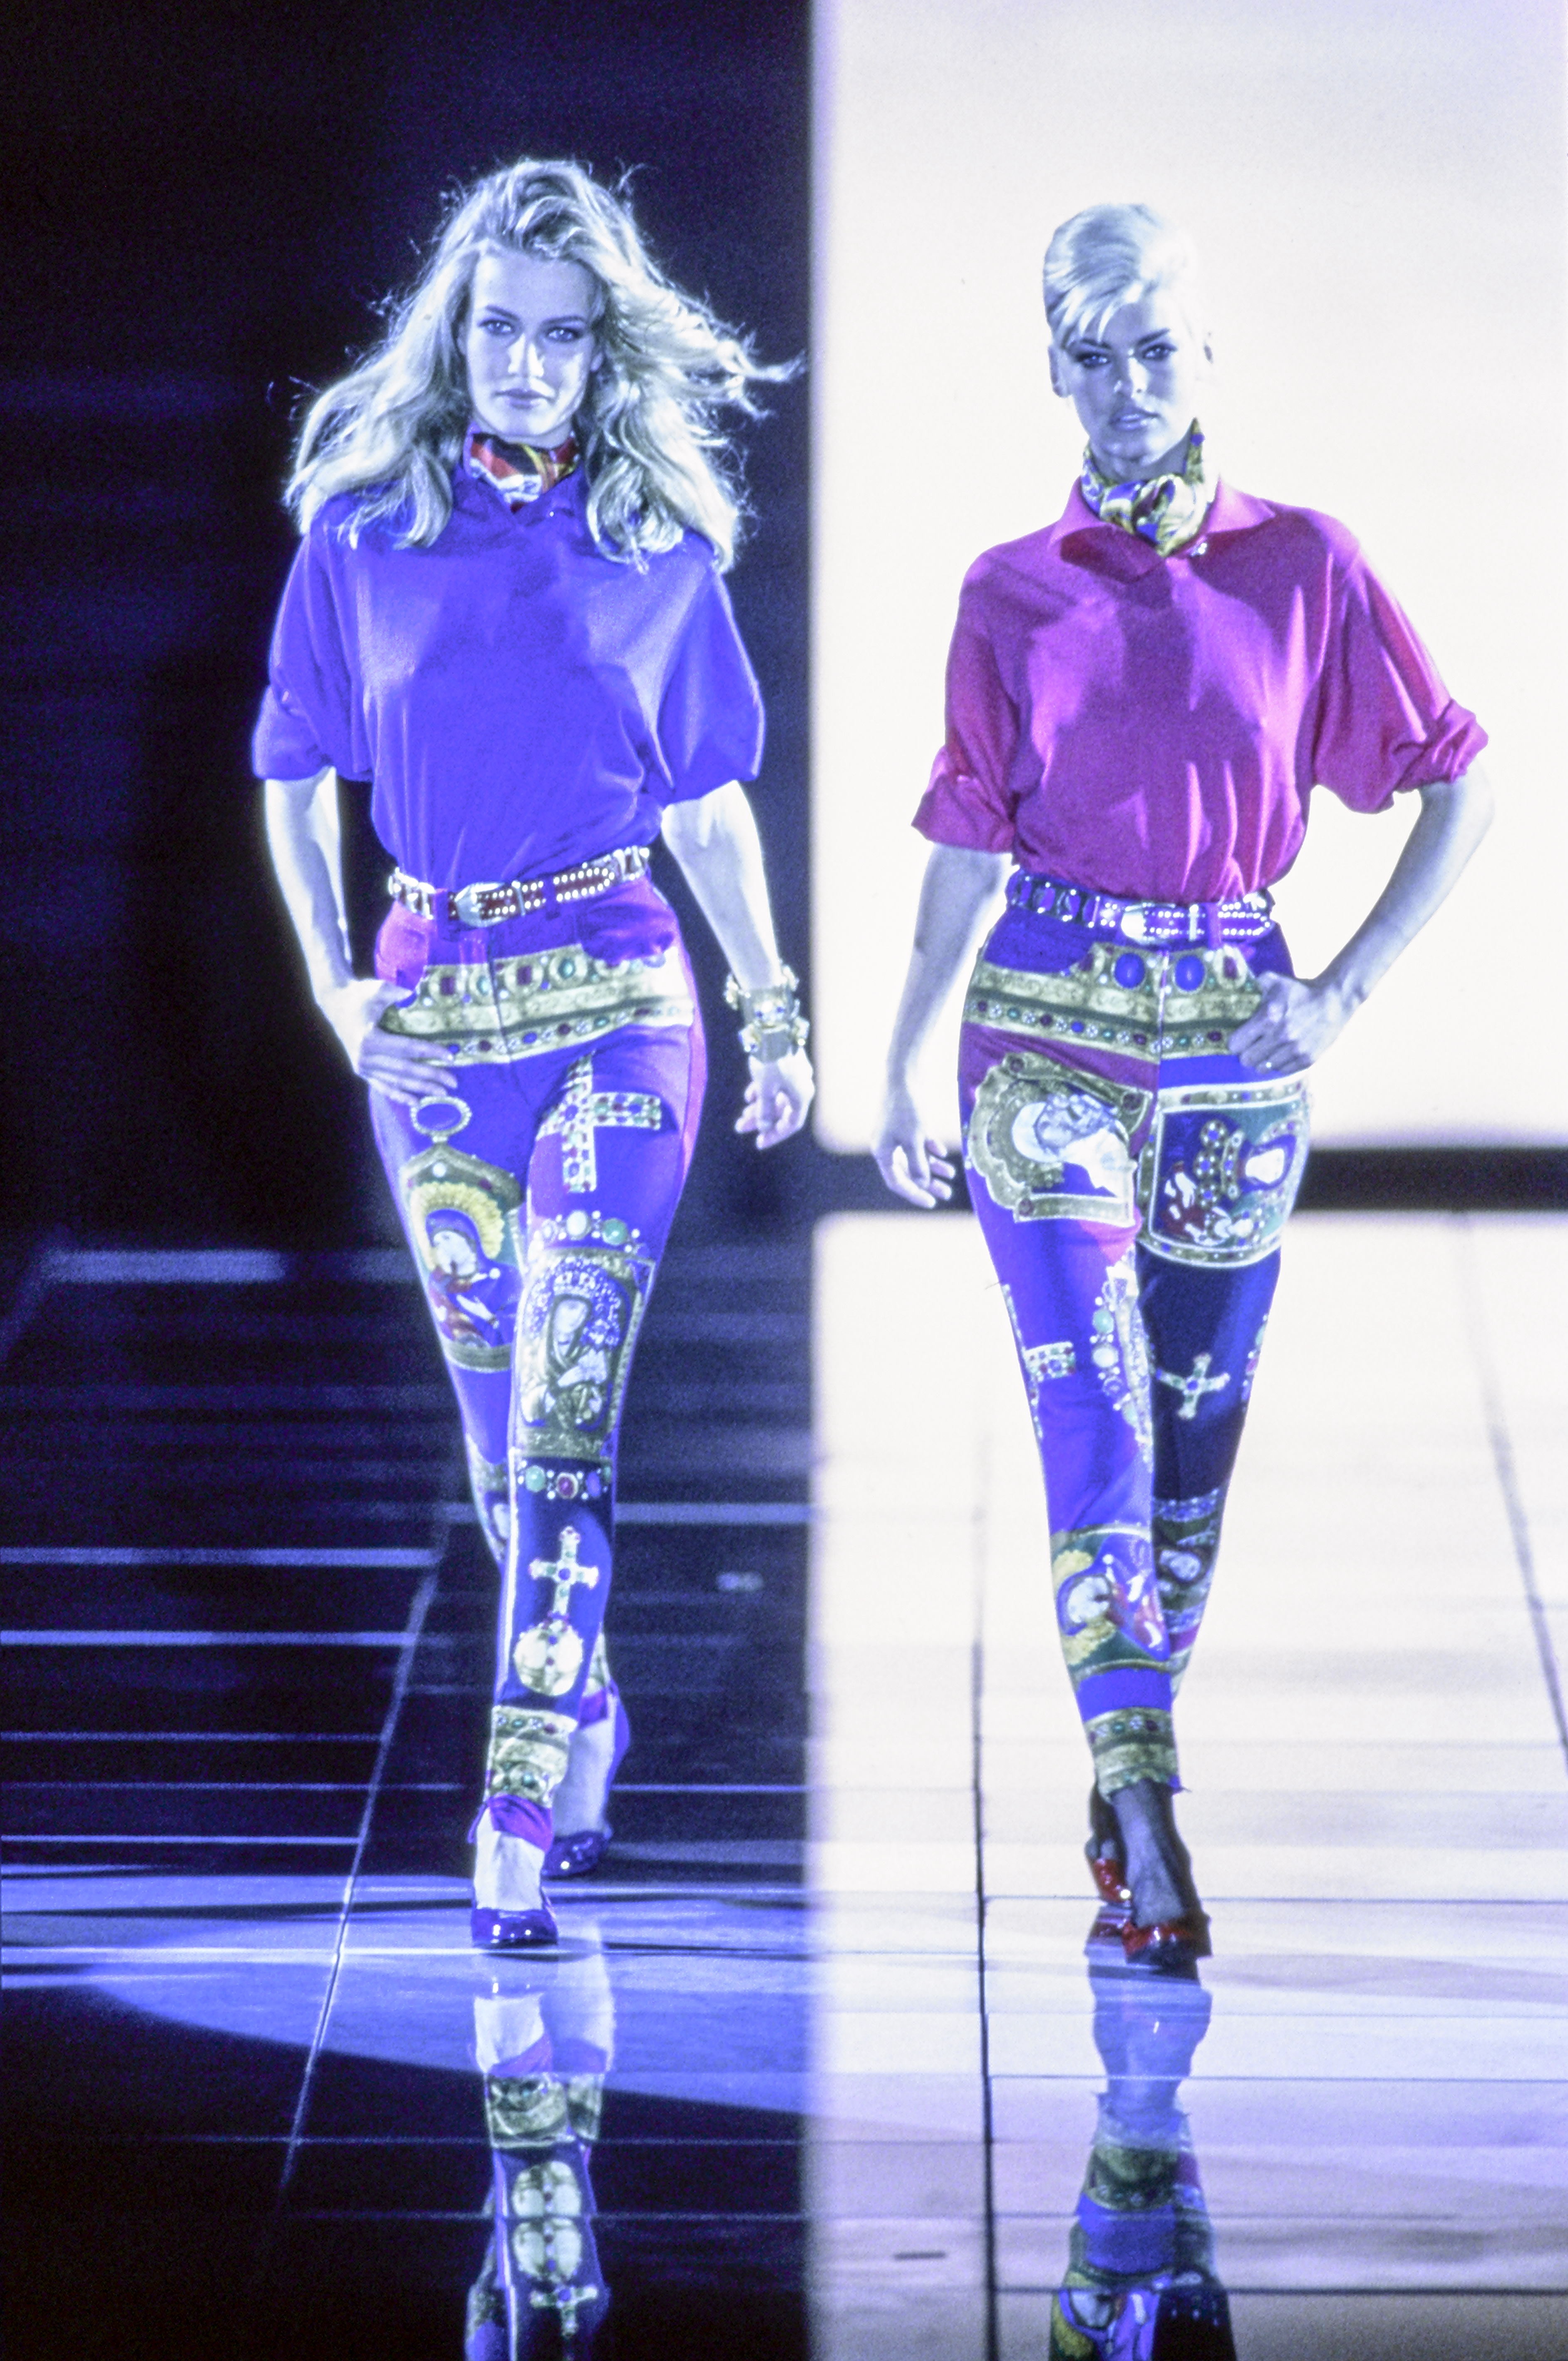 25 Most Influential '90s Fashion Shows